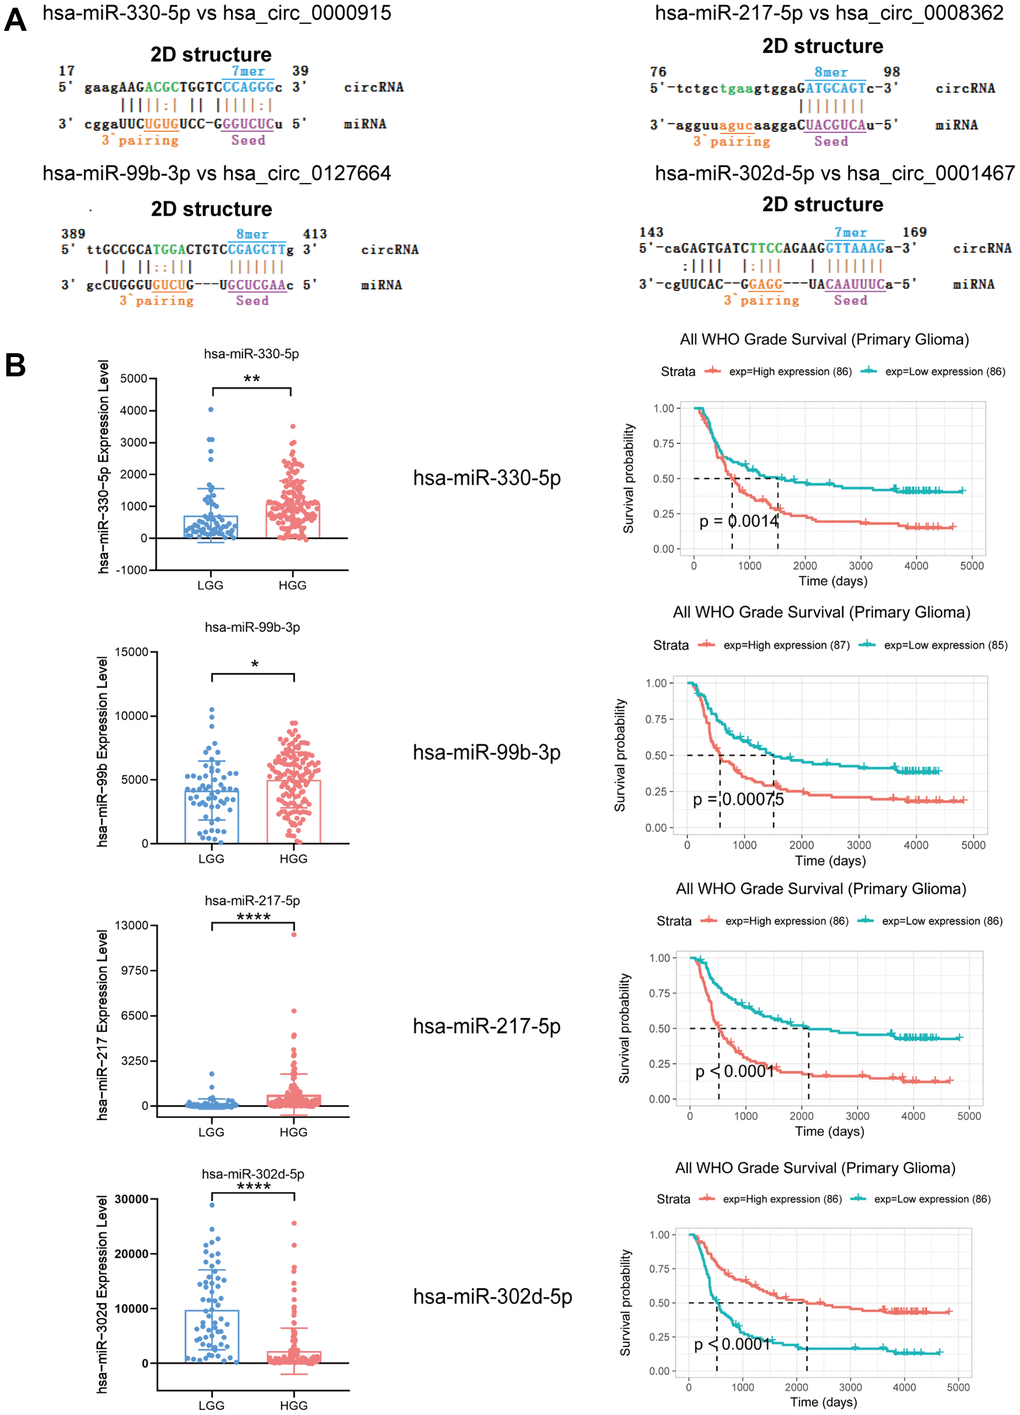 Expression and survival analysis of 4 target miRNAs and sequence analysis. (A) Sequence analysis results for MREs of identified circRNAs and target miRNAs. (B) In comparison to LGG patients, hsa-miR-330-5p, hsa-miR-99b-3p and hsa-miR-217-5p were upregulated in HGG, but hsa-miR-302d-5p was downregulated. Survival analysis of 4 target miRNAs. *p 